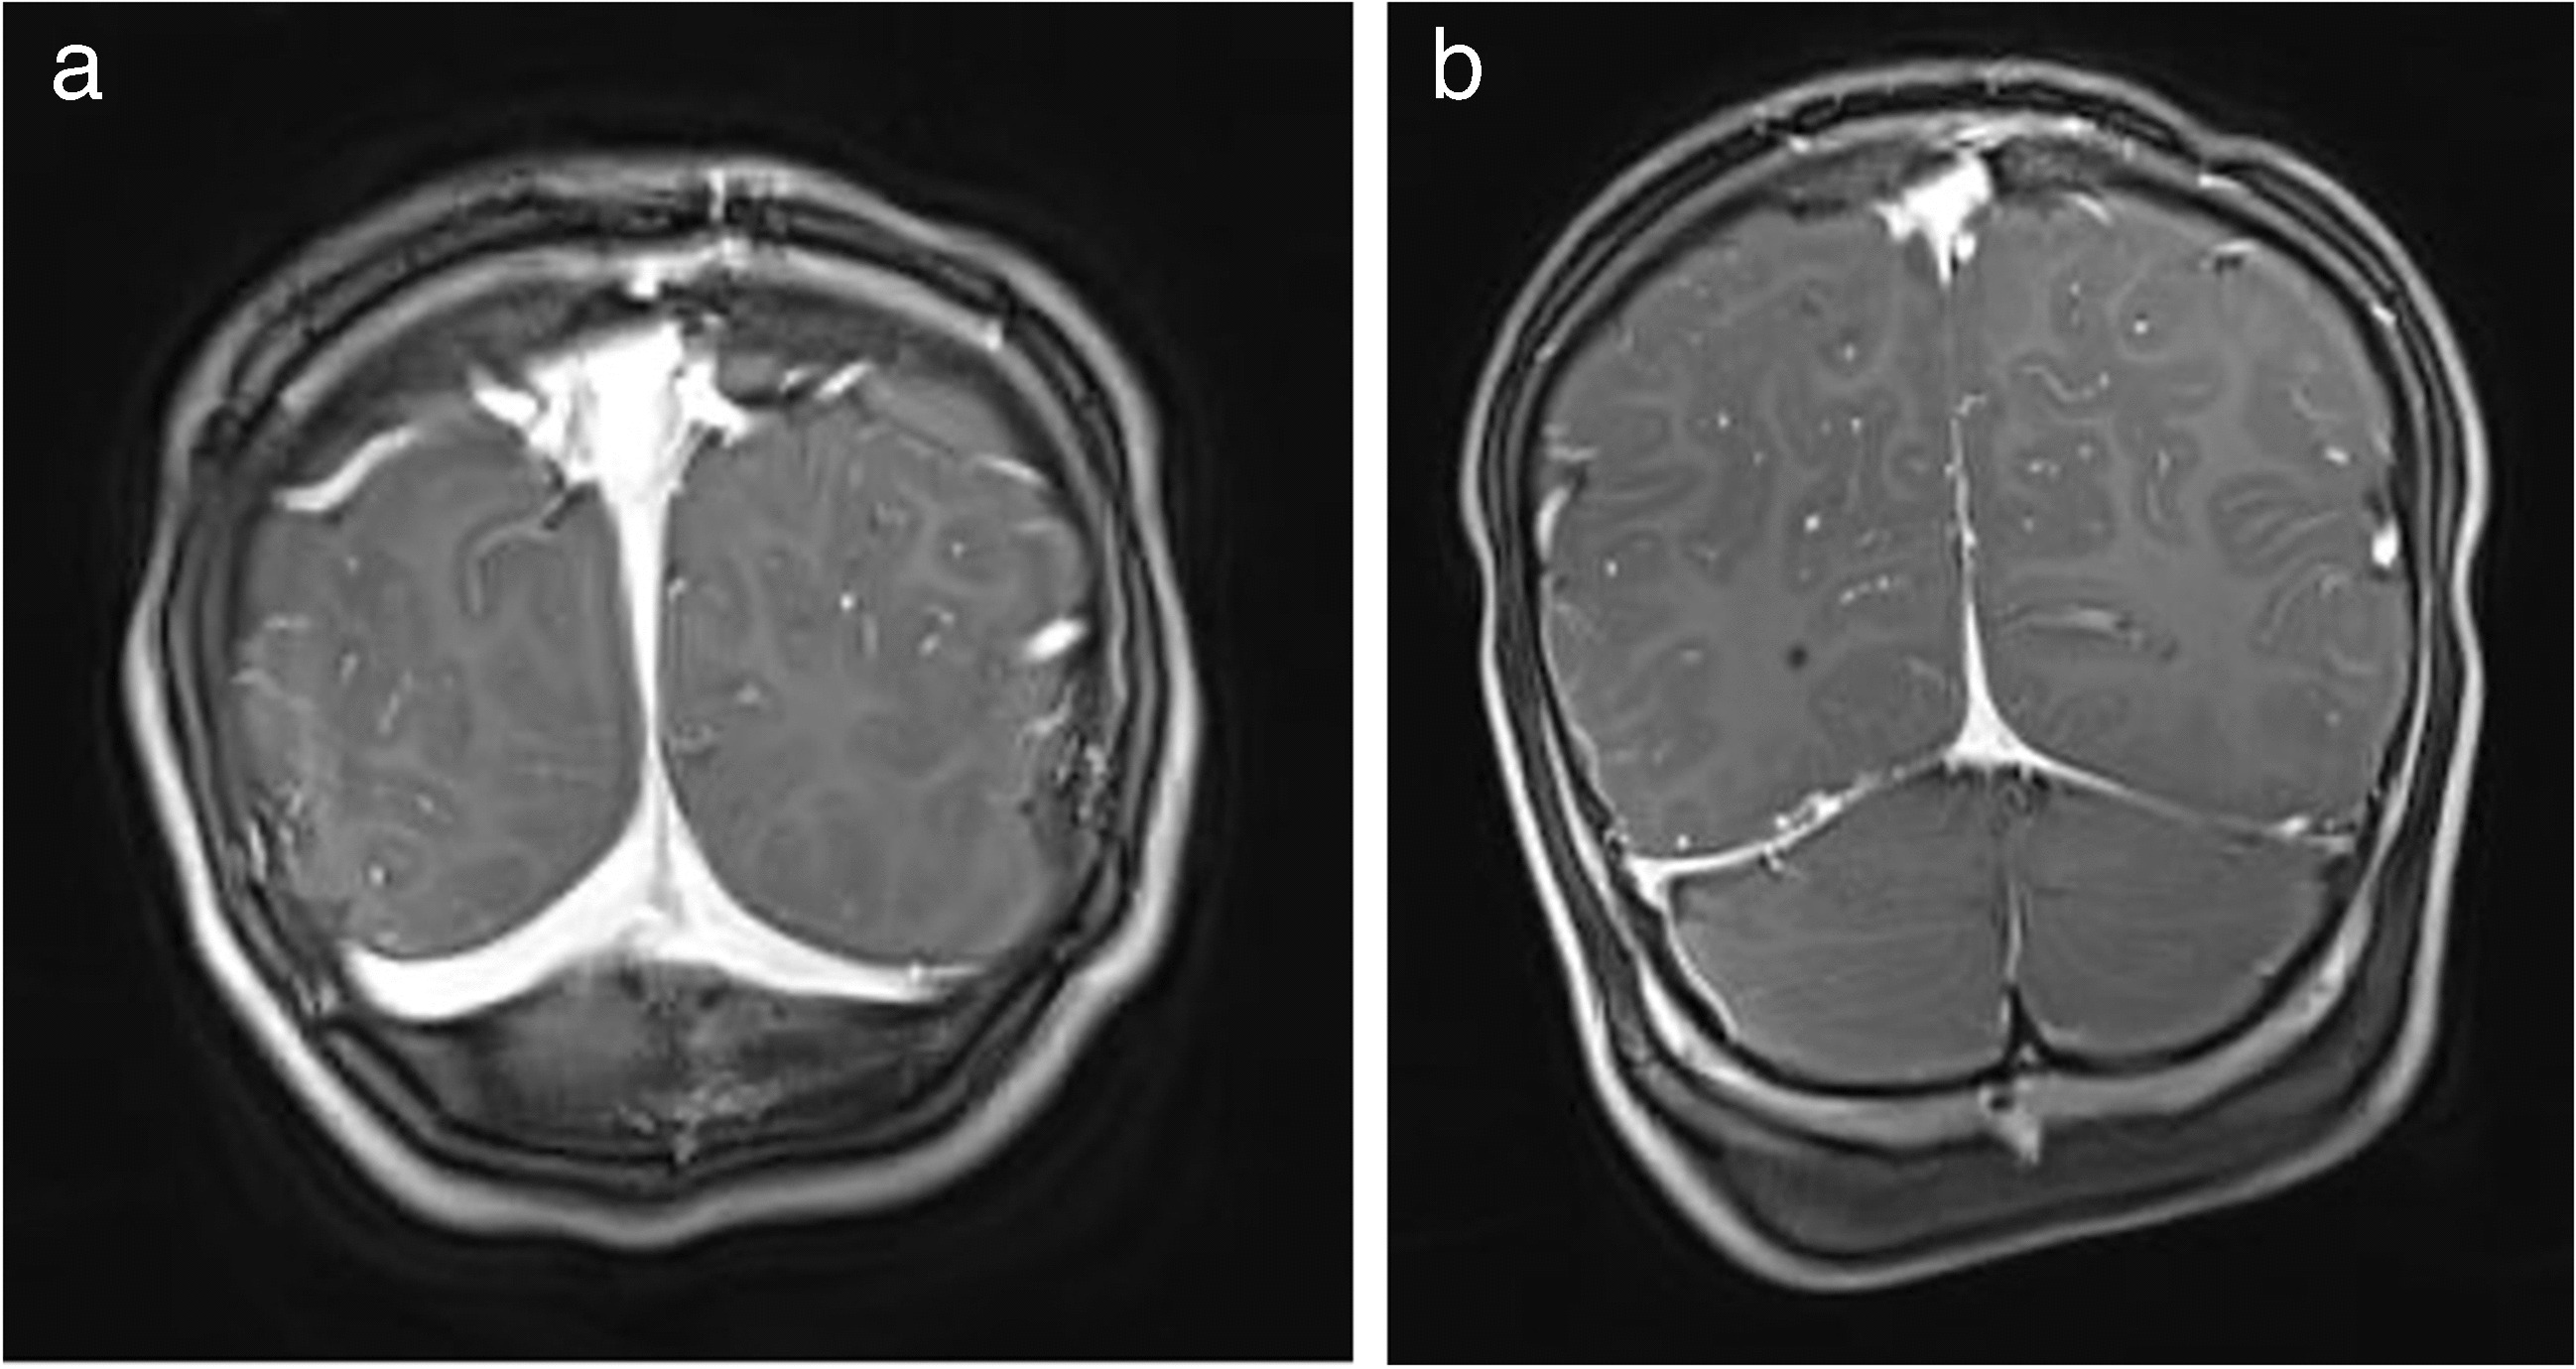 Occipital emissary vein existence and its impact on the diagnosis of idiopathic intracranial hypertension in pediatric patients